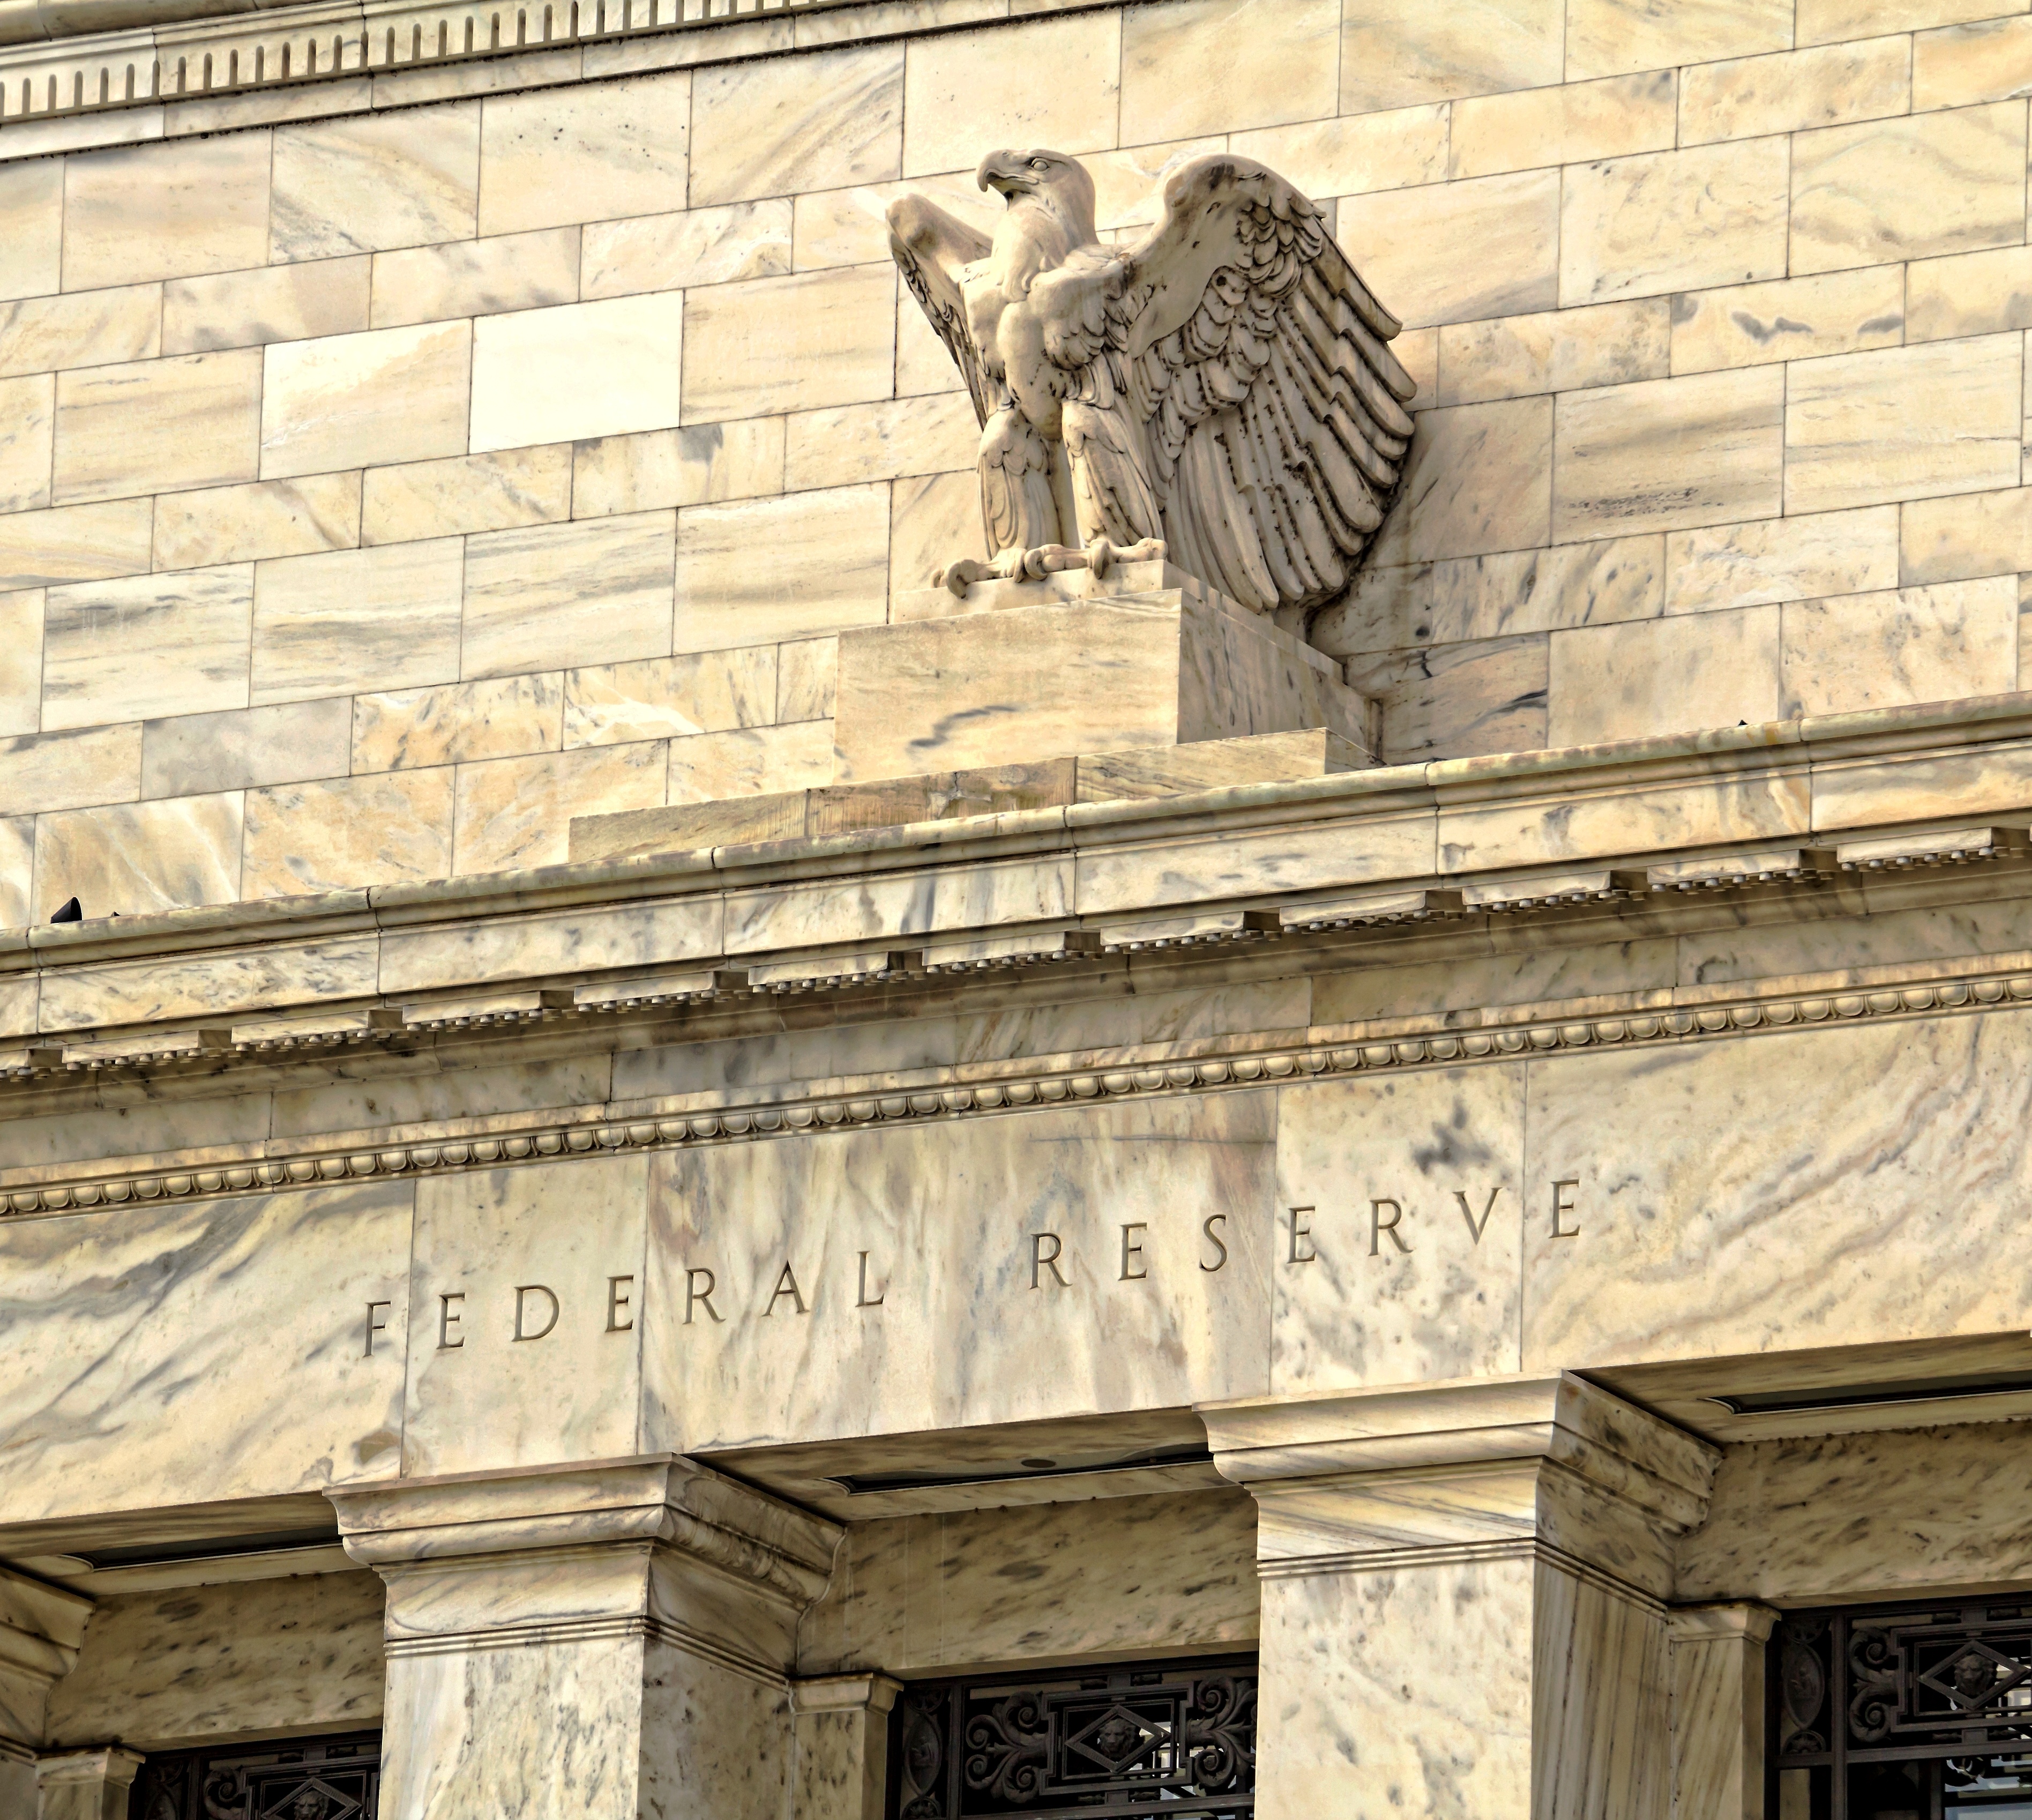 Stone sculpture of an eagle on the Federal Reserve building in Washington D.C.